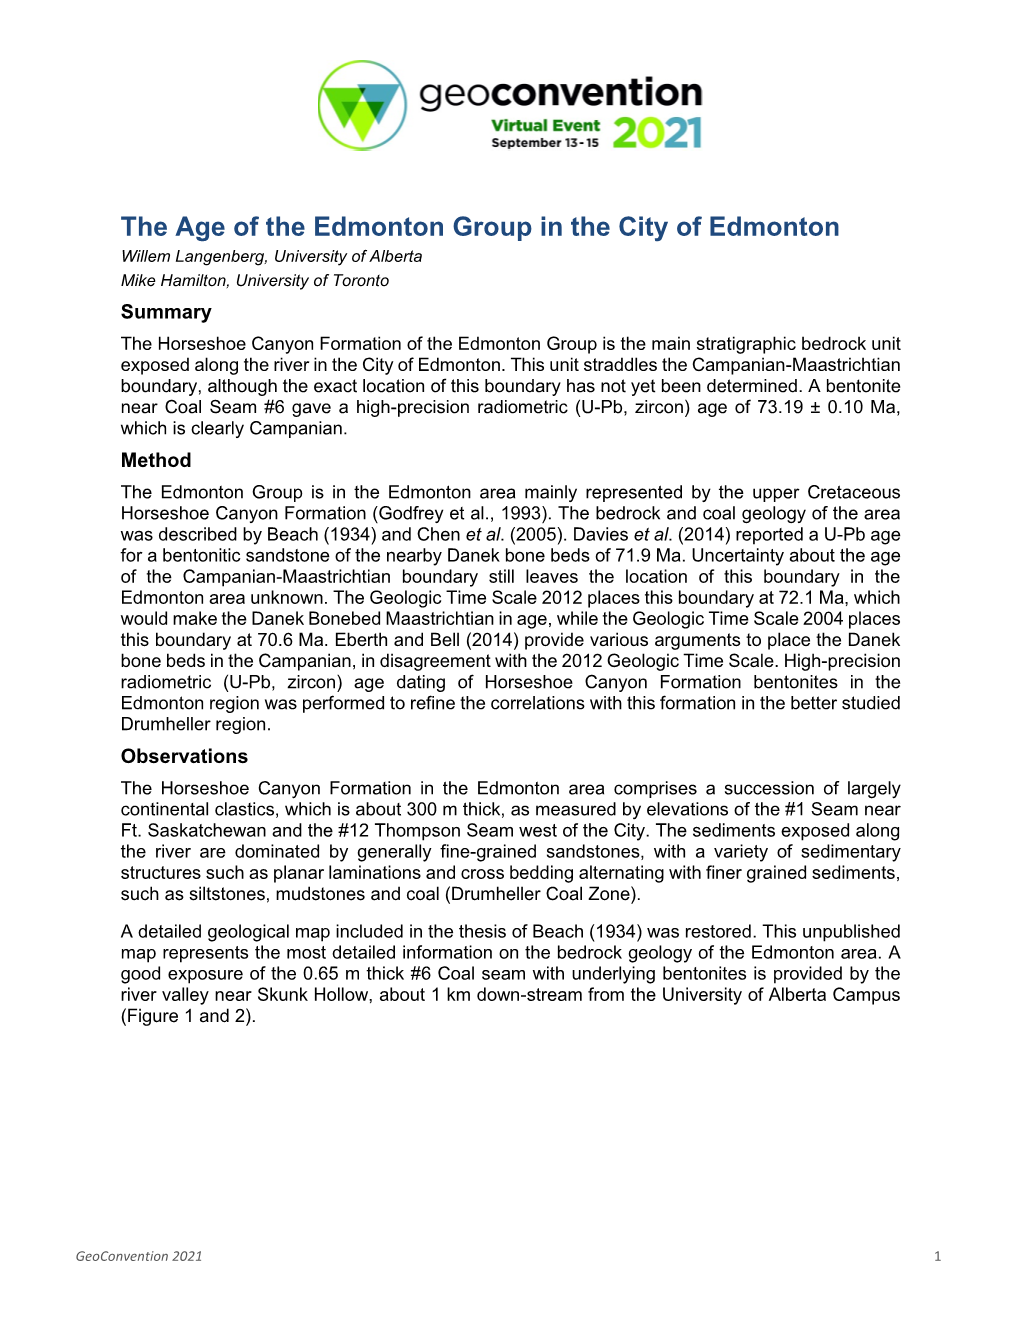 The Age of the Edmonton Group